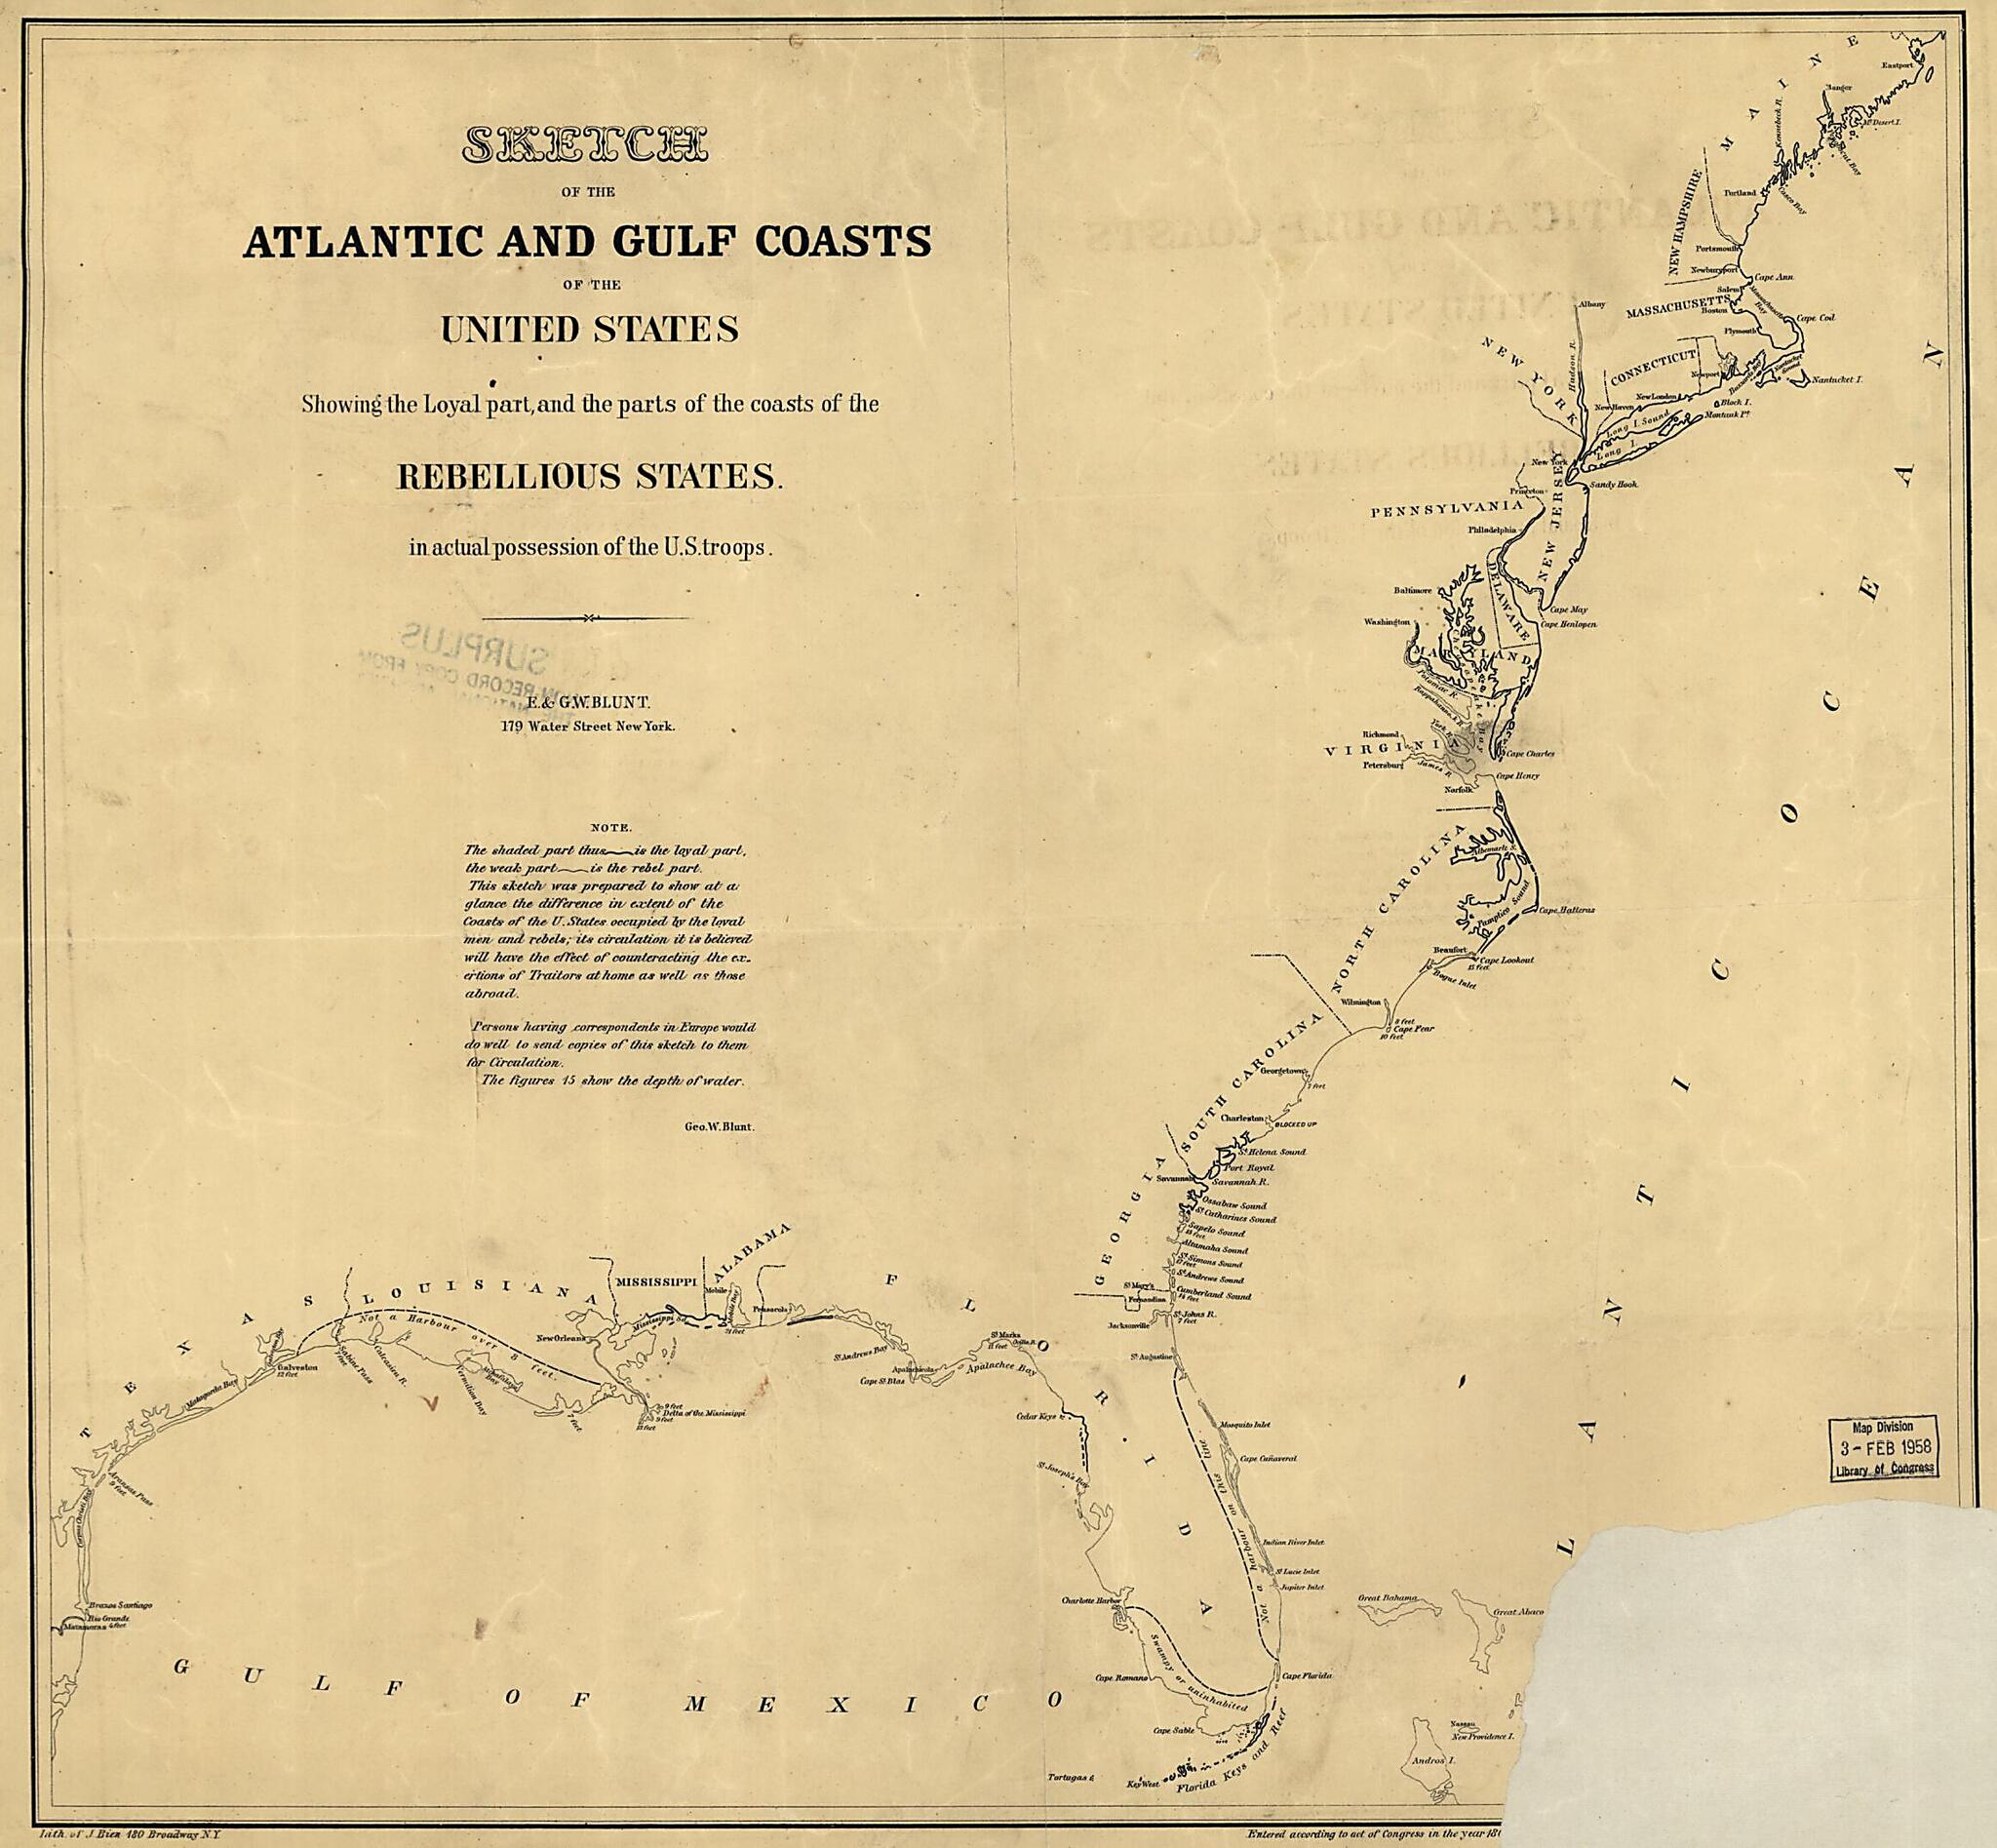 This old map of Sketch of the Atlantic and Gulf Coasts of the United States Showing the Loyal Part, and the Parts of the Coasts of the Rebellious States In Actual Possession of the U. S. Troops from 1862 was created by Edmund Blunt, G. W. (George William